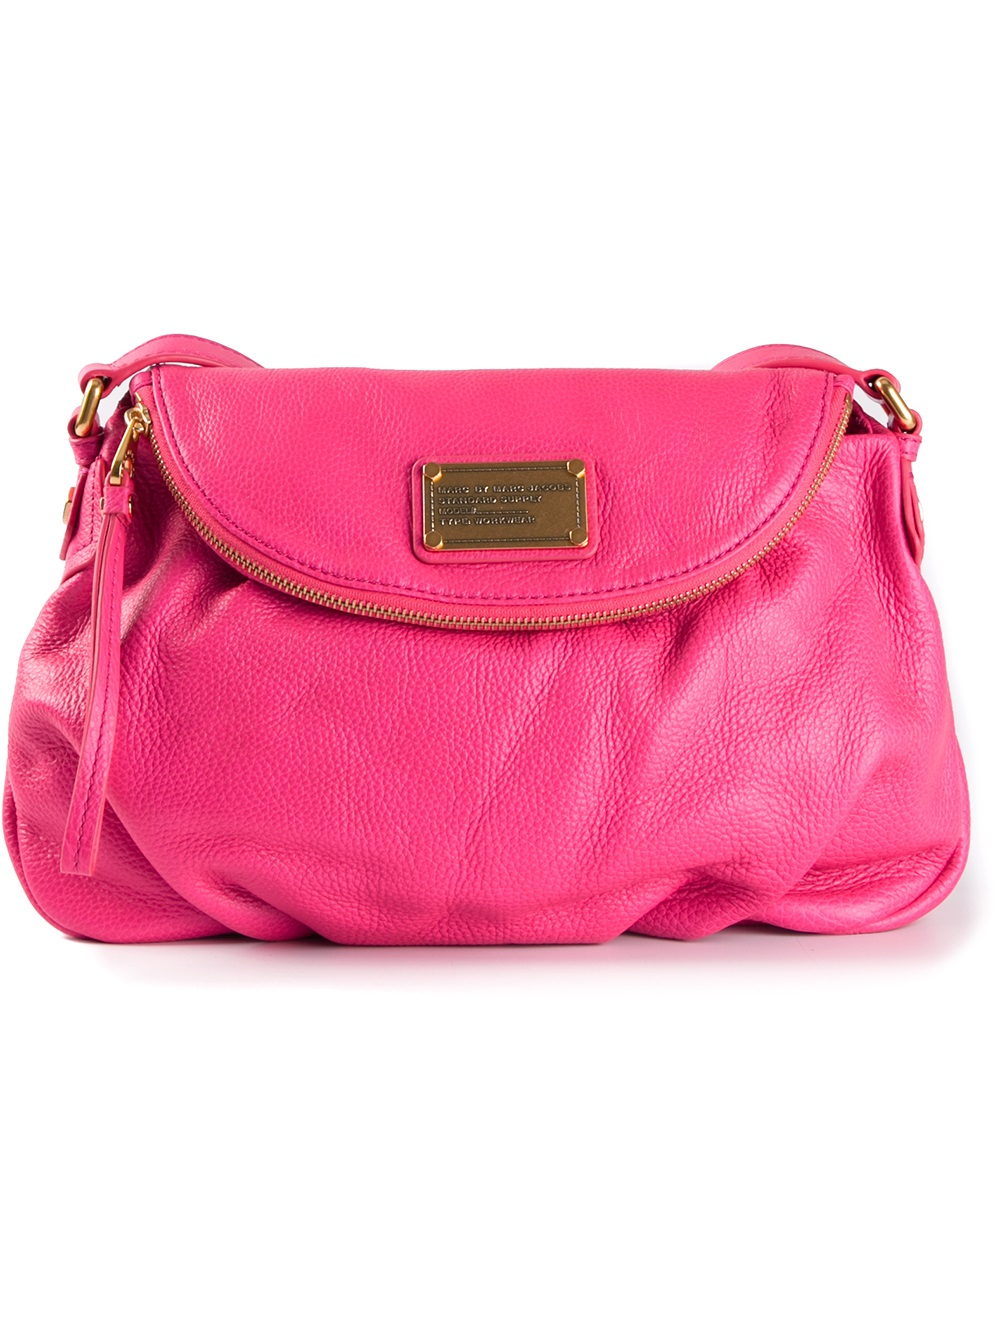 Marc By Marc Jacobs Cross Body Bag in Pink & Purple (Pink) - Lyst